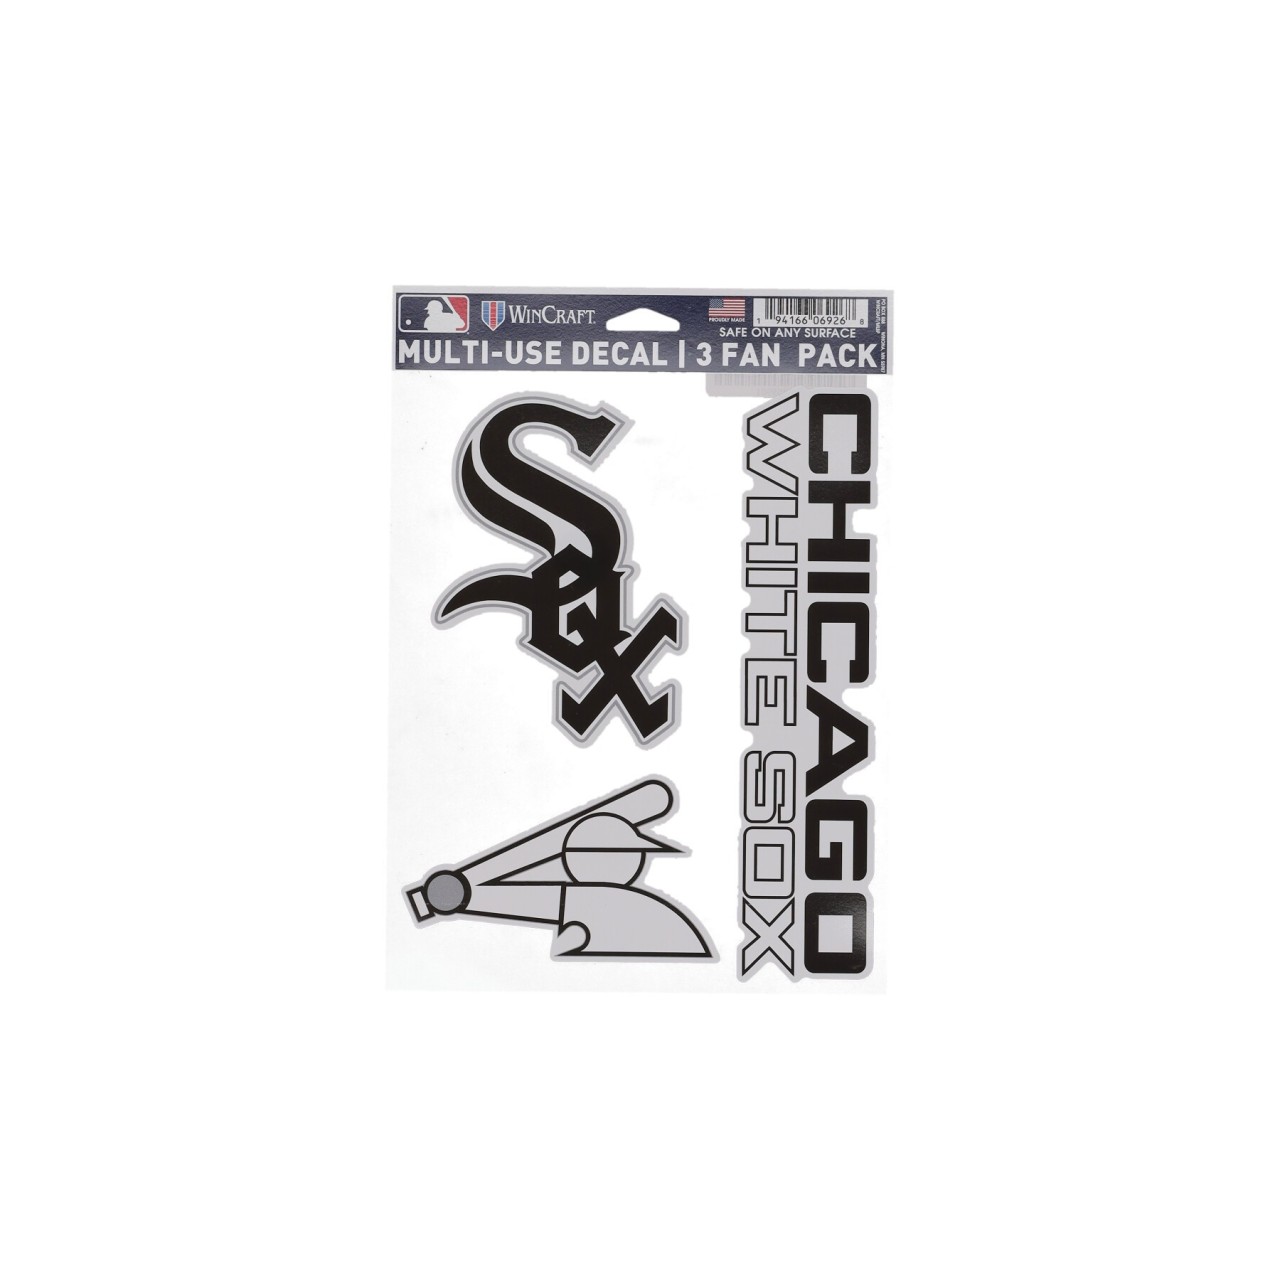 WINCRAFT MLB 5.5 x 7.75” FAN PACK DECALS CHIWHI 06926319